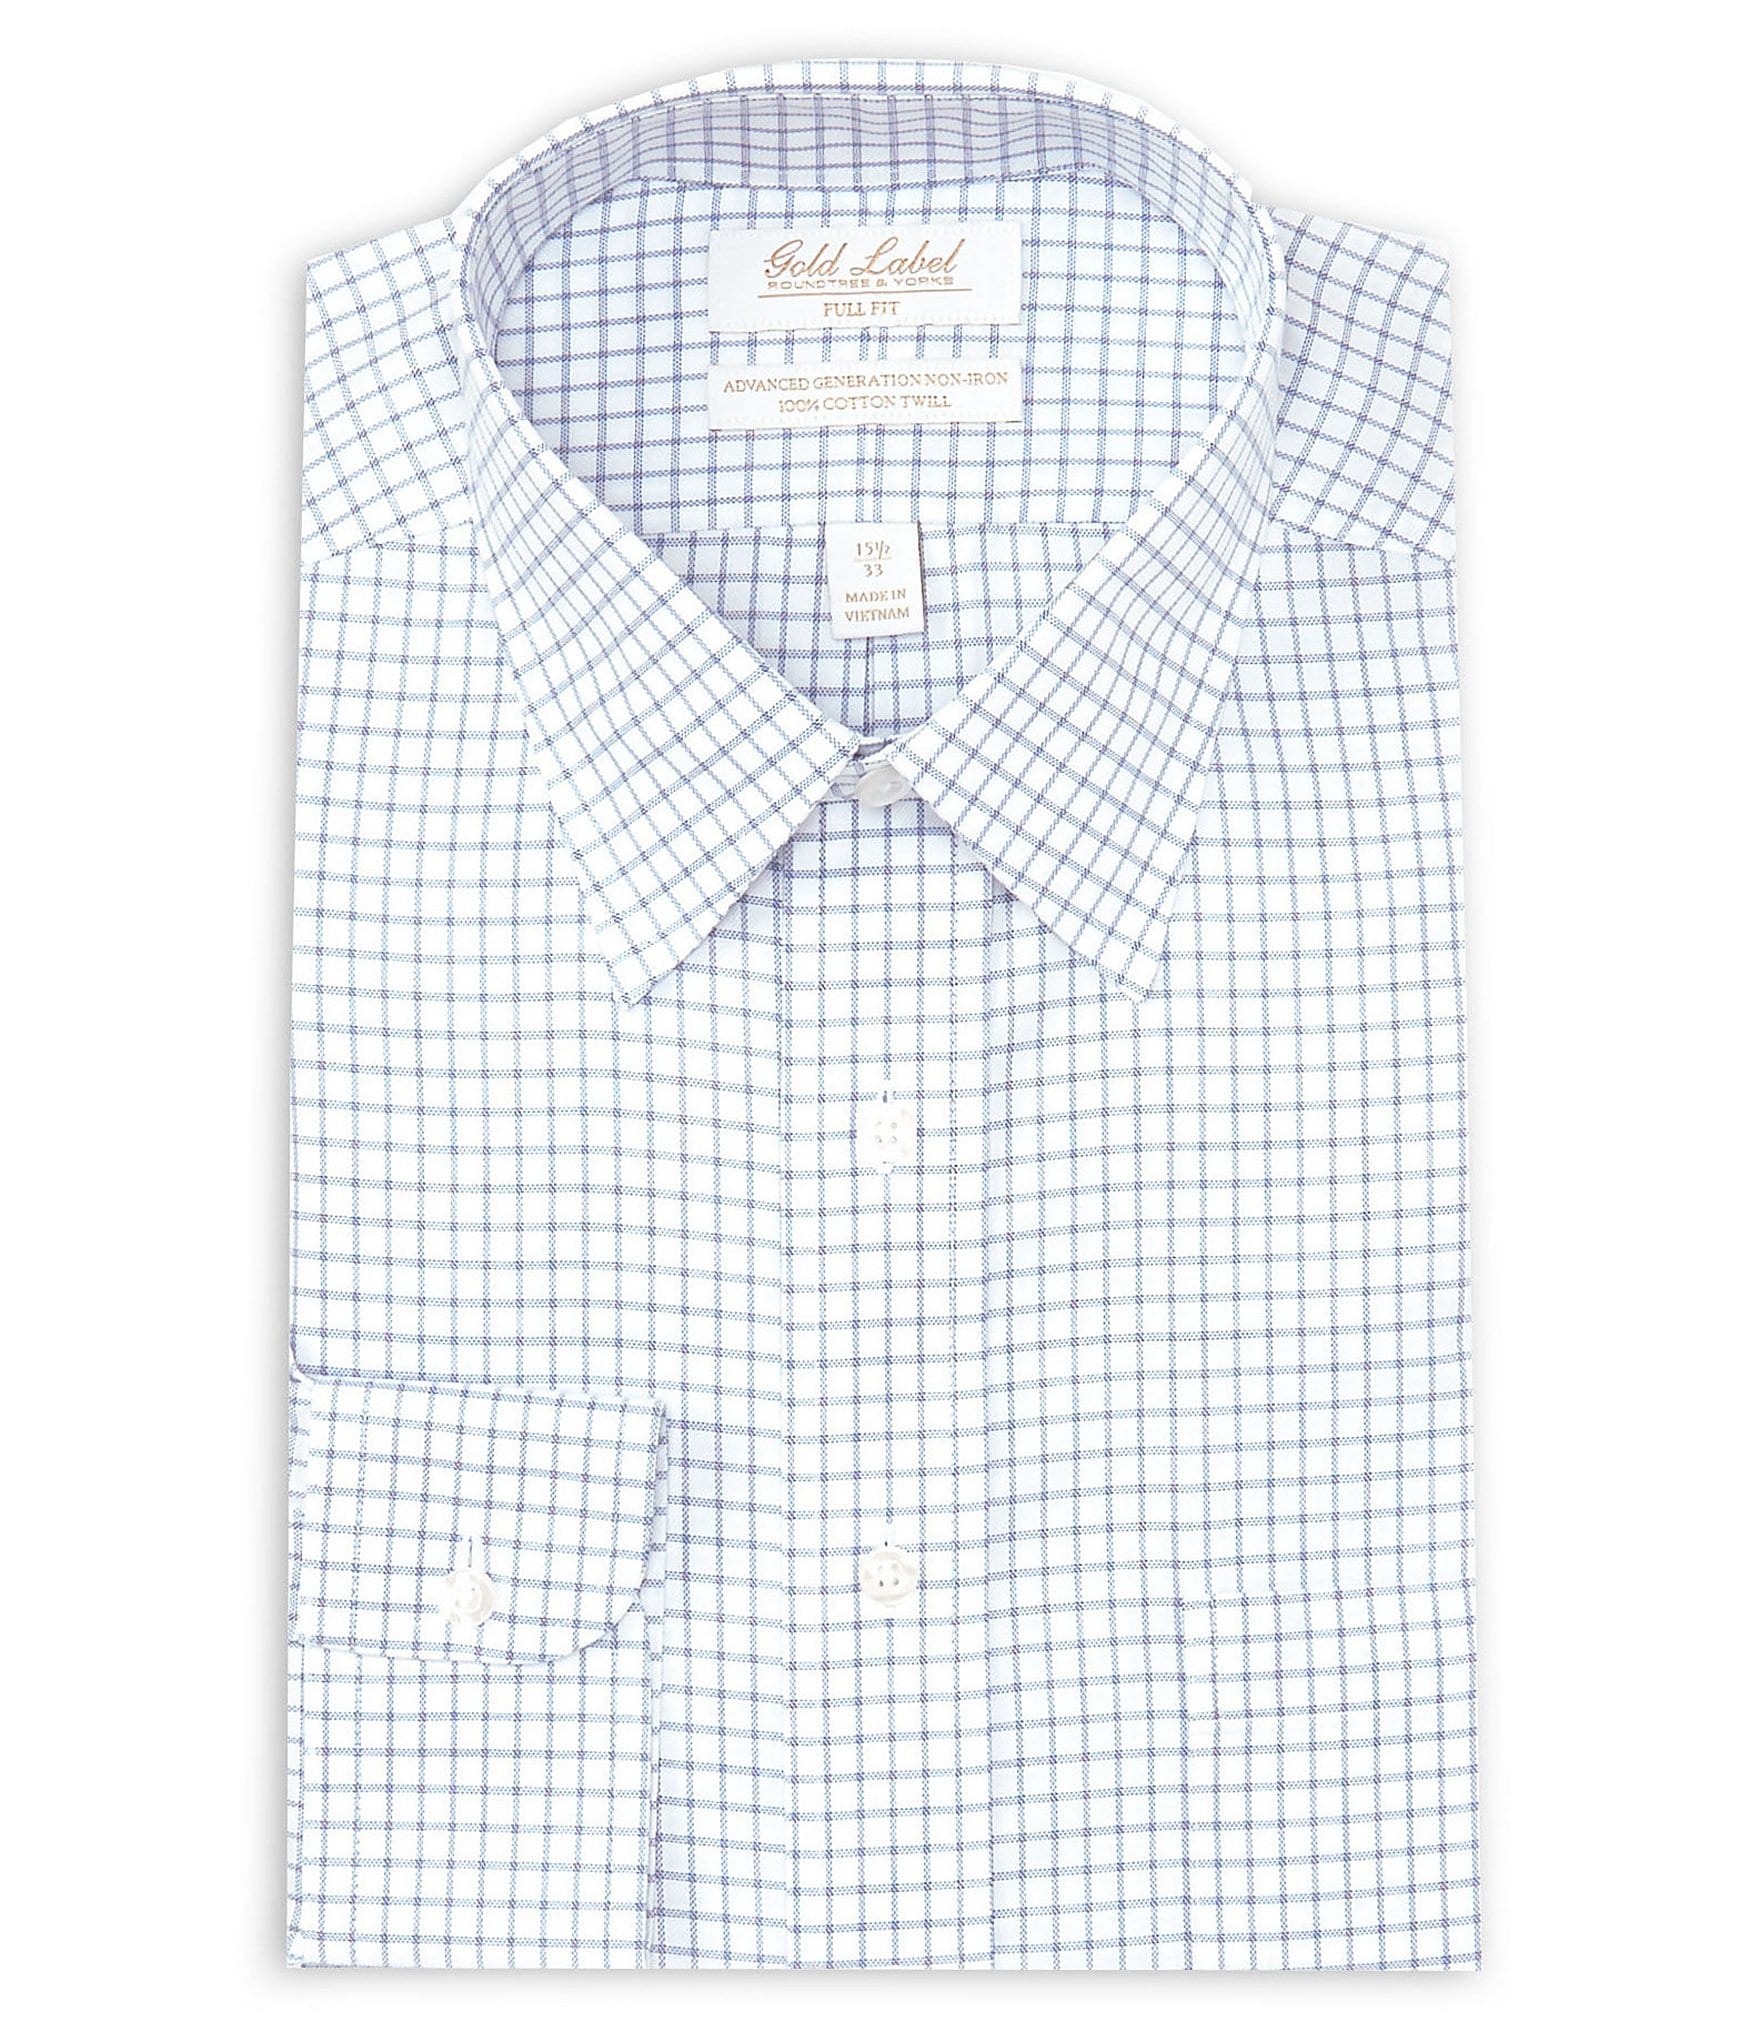 Gold Label Roundtree & Yorke Full Fit Non-Iron Point Collar Grid Print ...